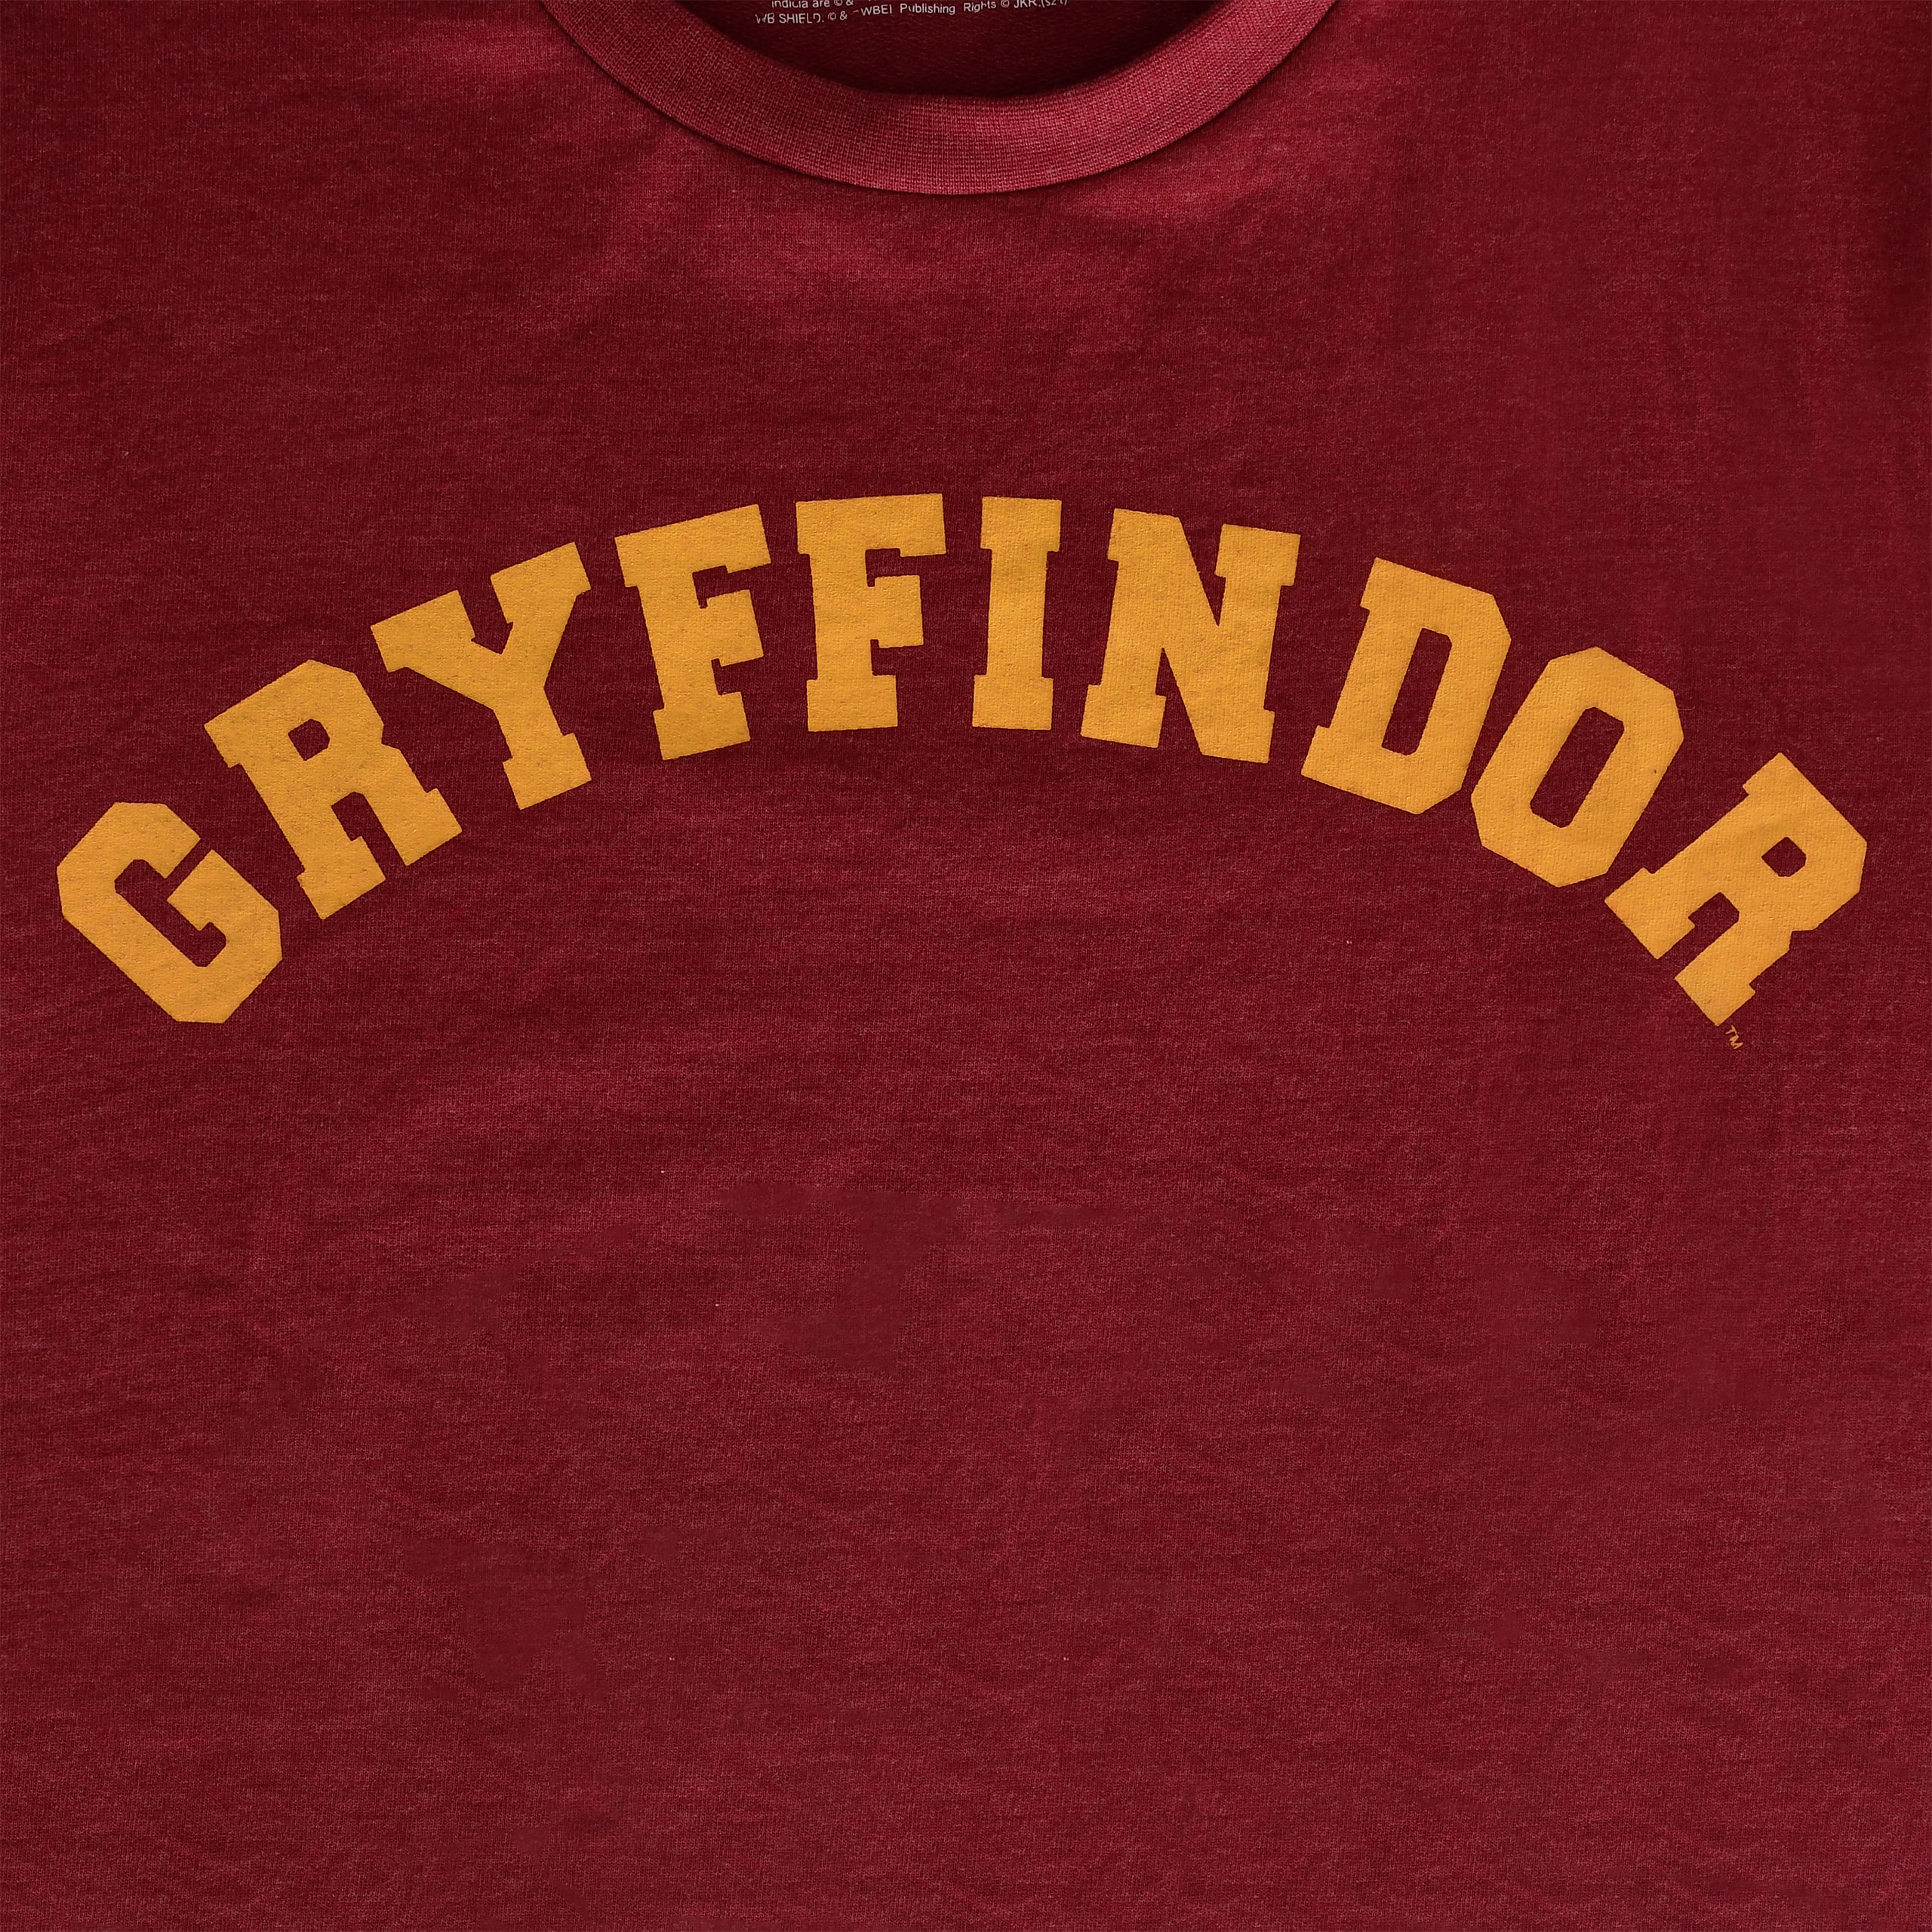 Harry Potter - Gryffindor College Trui rood